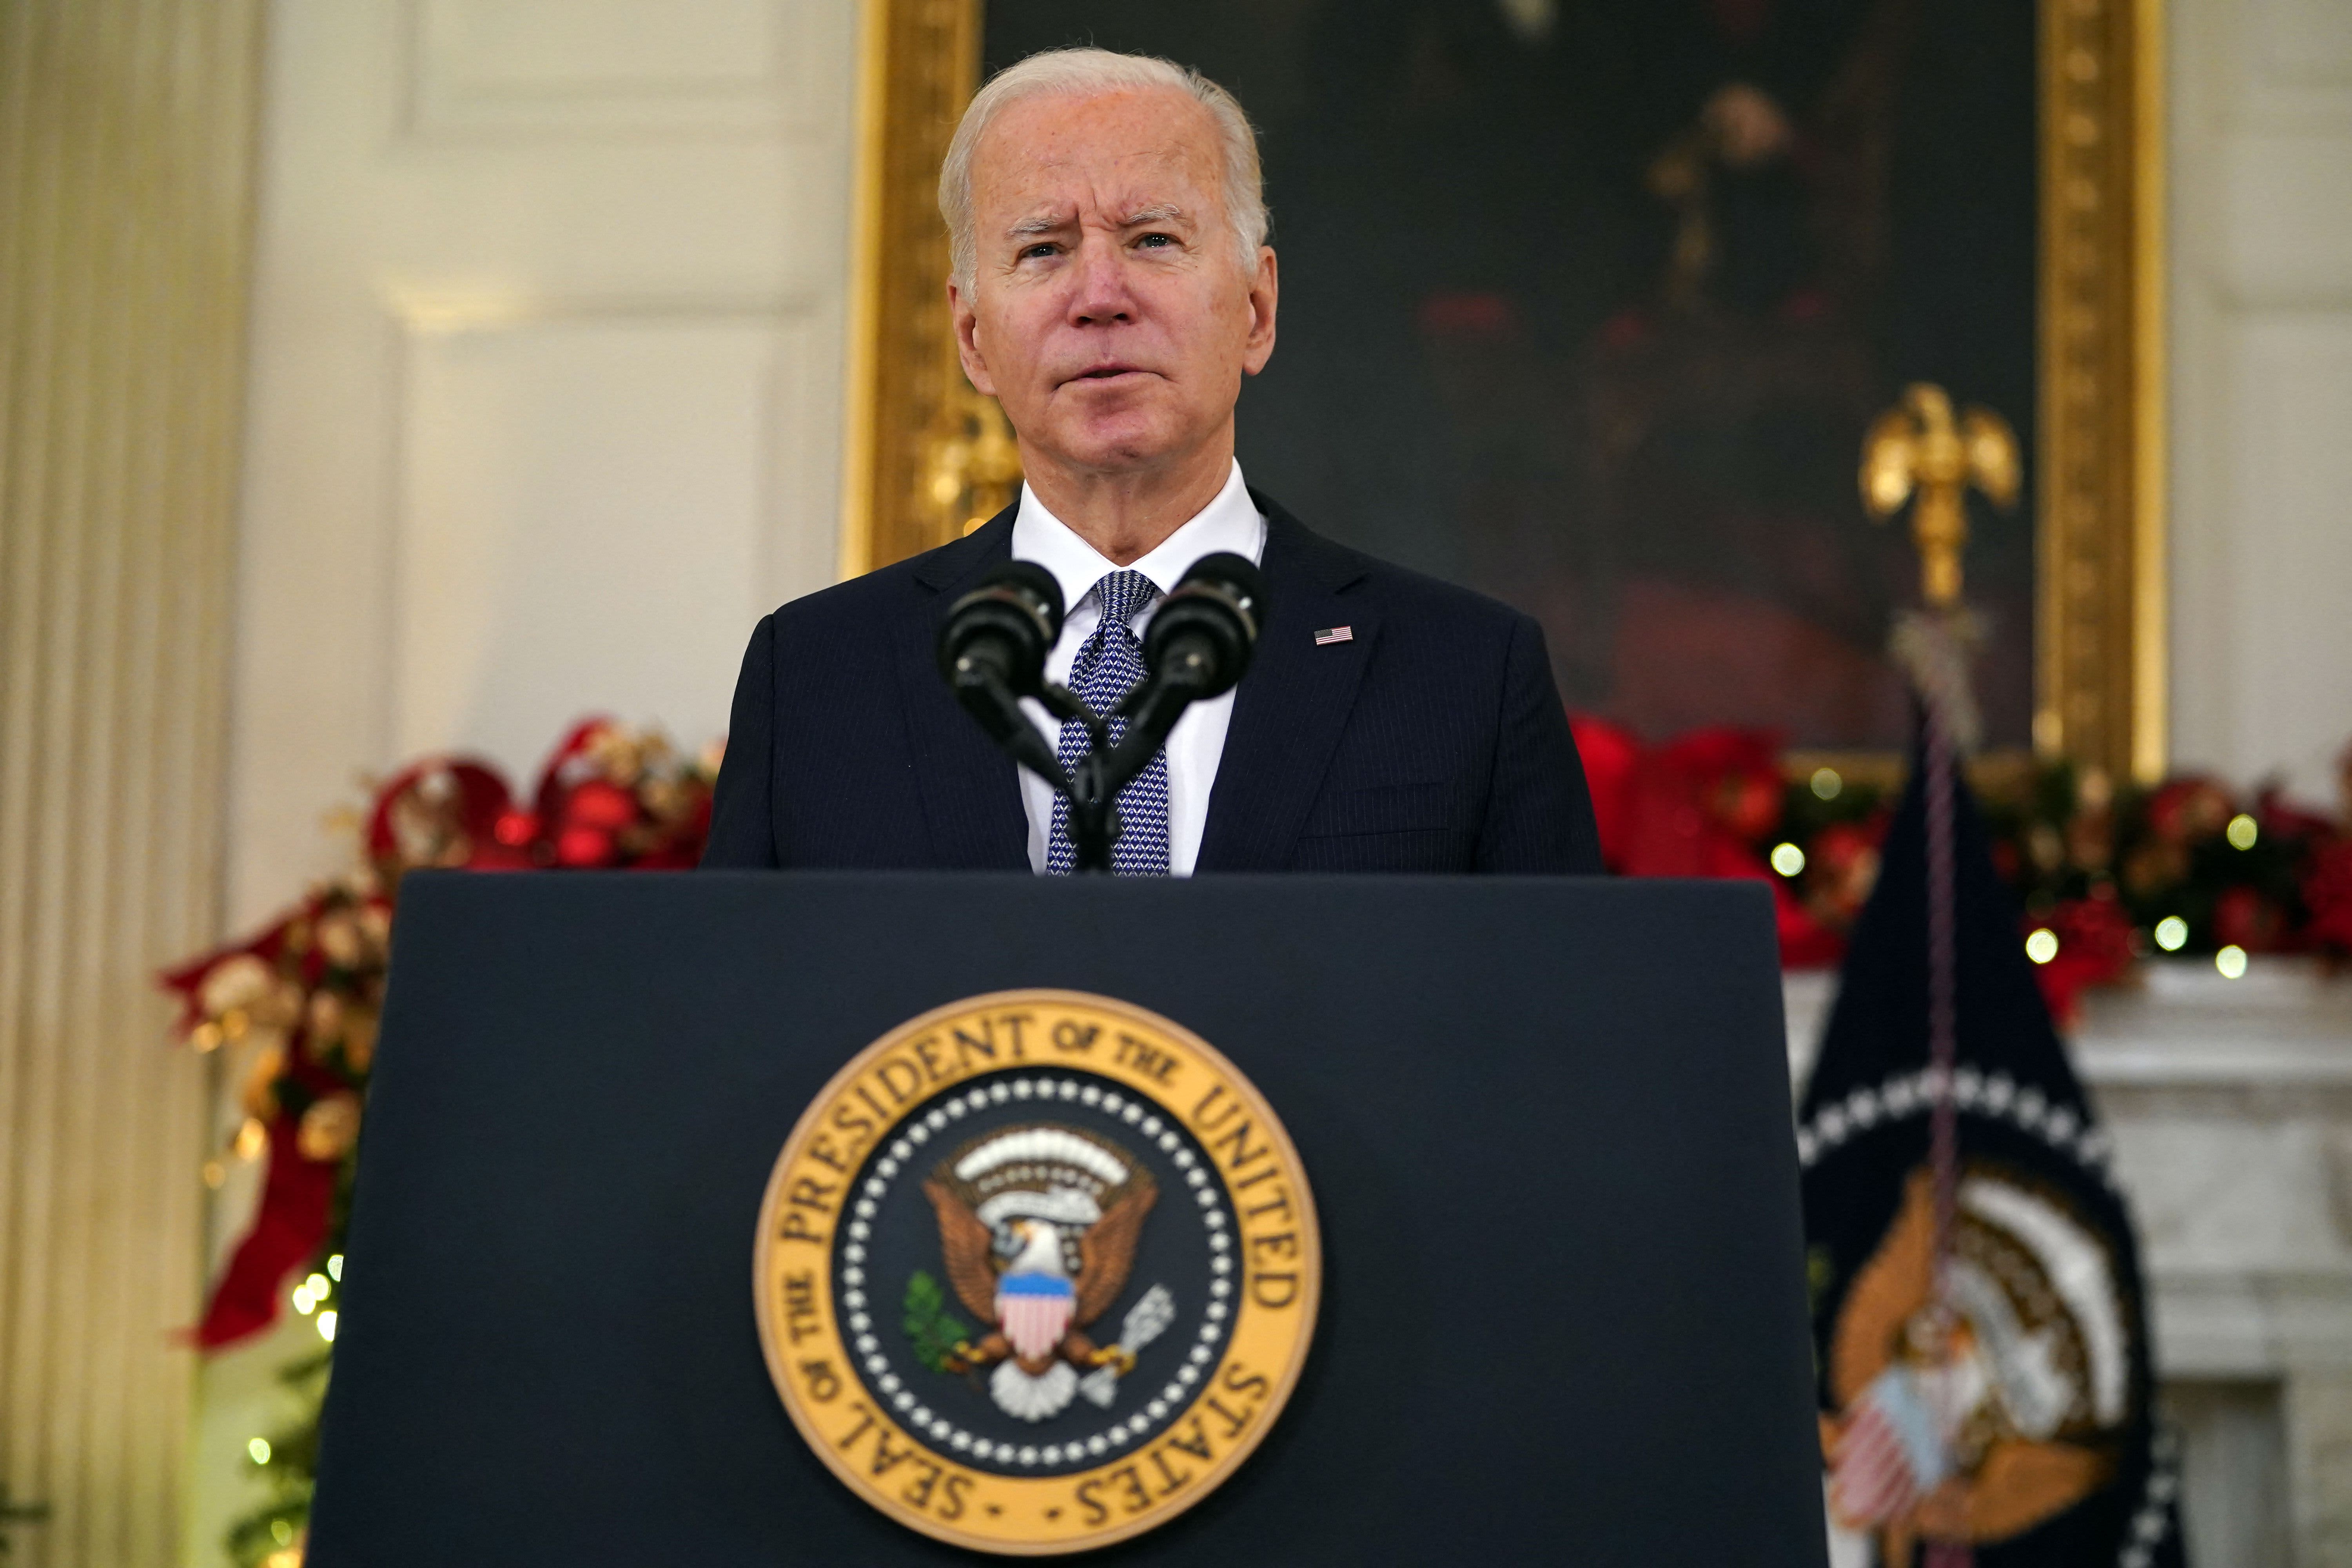 Biden glosses over weak November job gains to highlight low unemployment rate